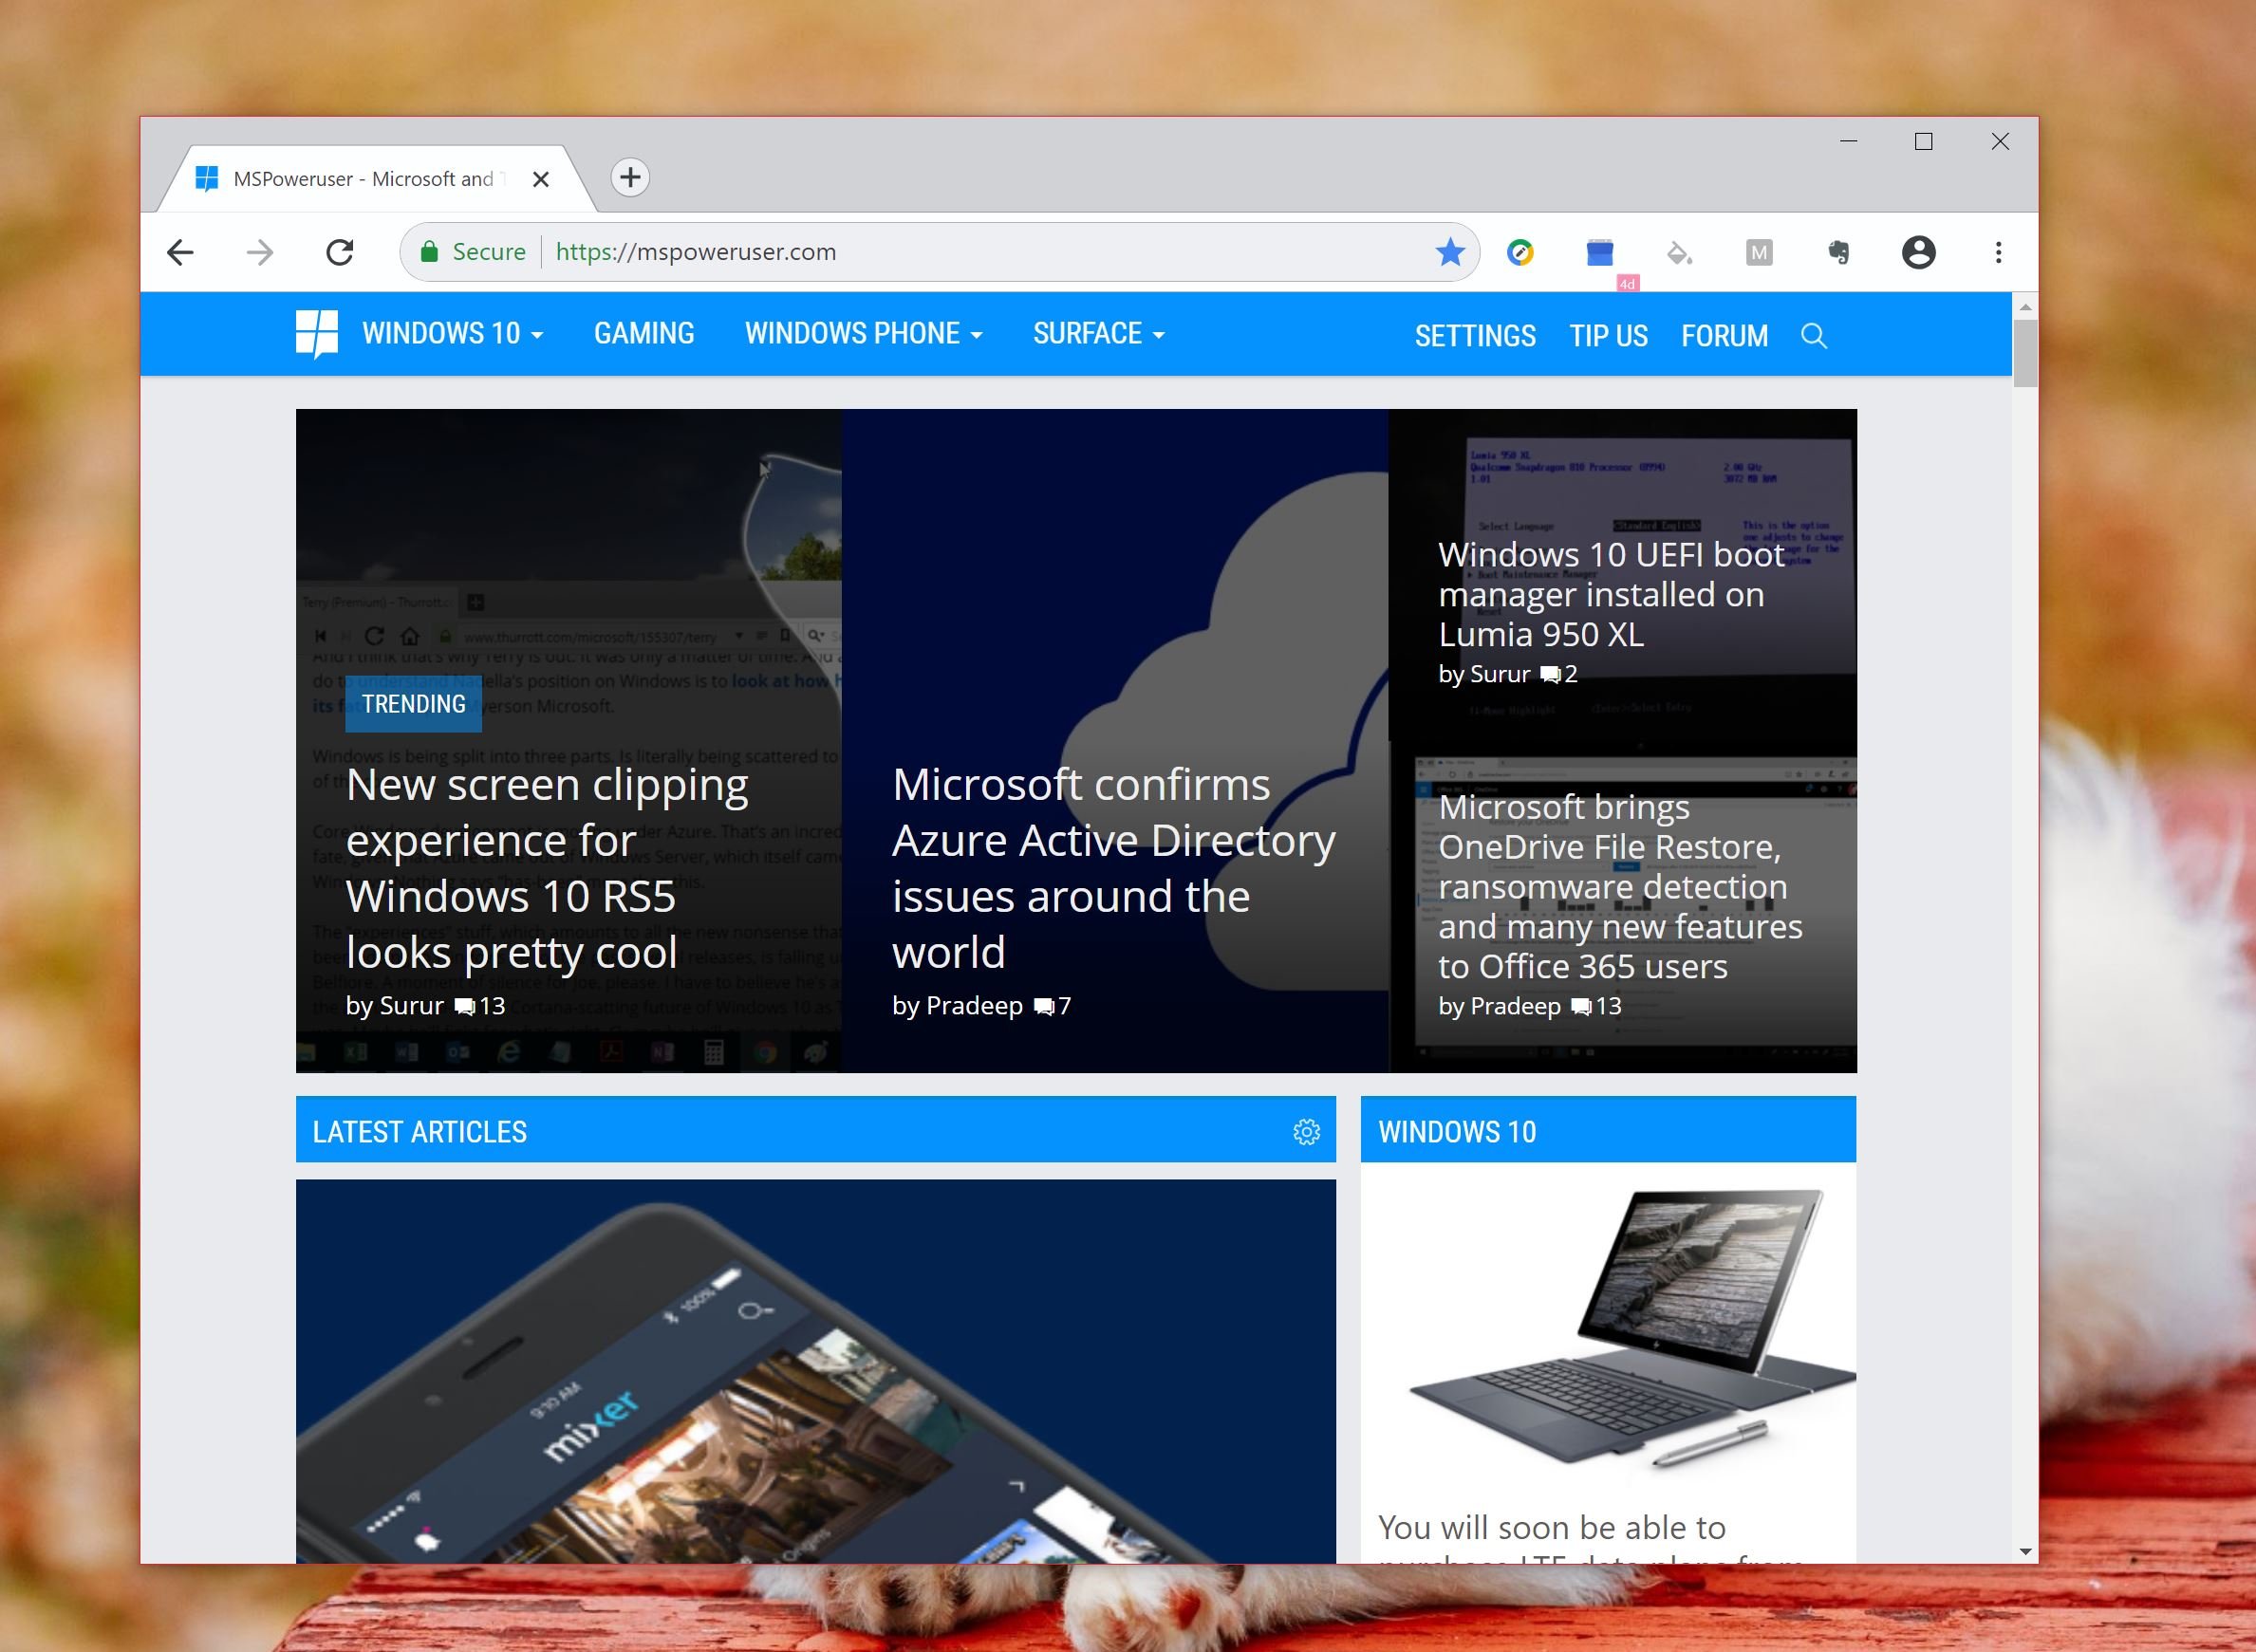 Microsoft releases Windows Defender extension for Google Chrome browser